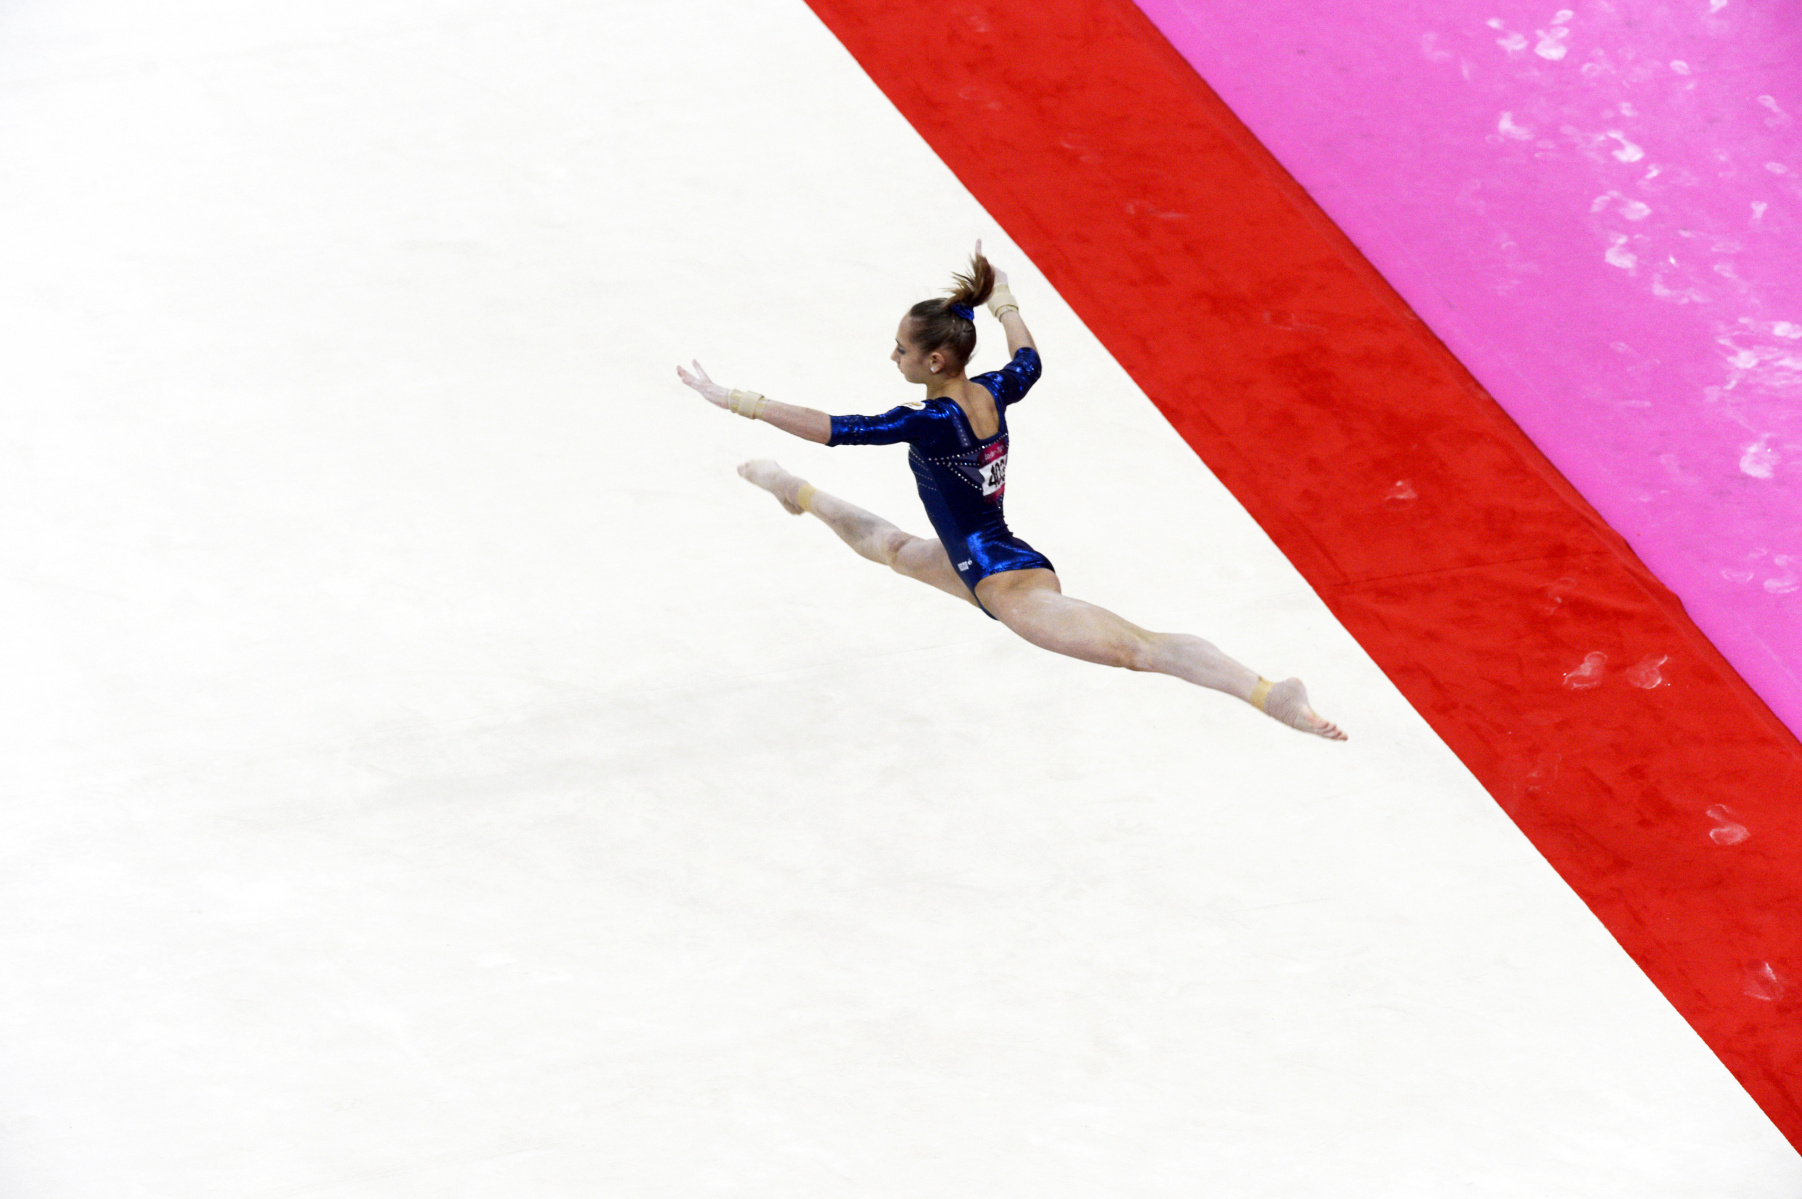 Victoria Komova of Russia performs her floor exercise during the Women's All Around Gymnastics competition,  in which she won the silver medal. : London Olympics : Photography by Adam Stoltman: Sports Photography, The Arts, Portraiture, Travel, Photojournalism and Fine Art in New York